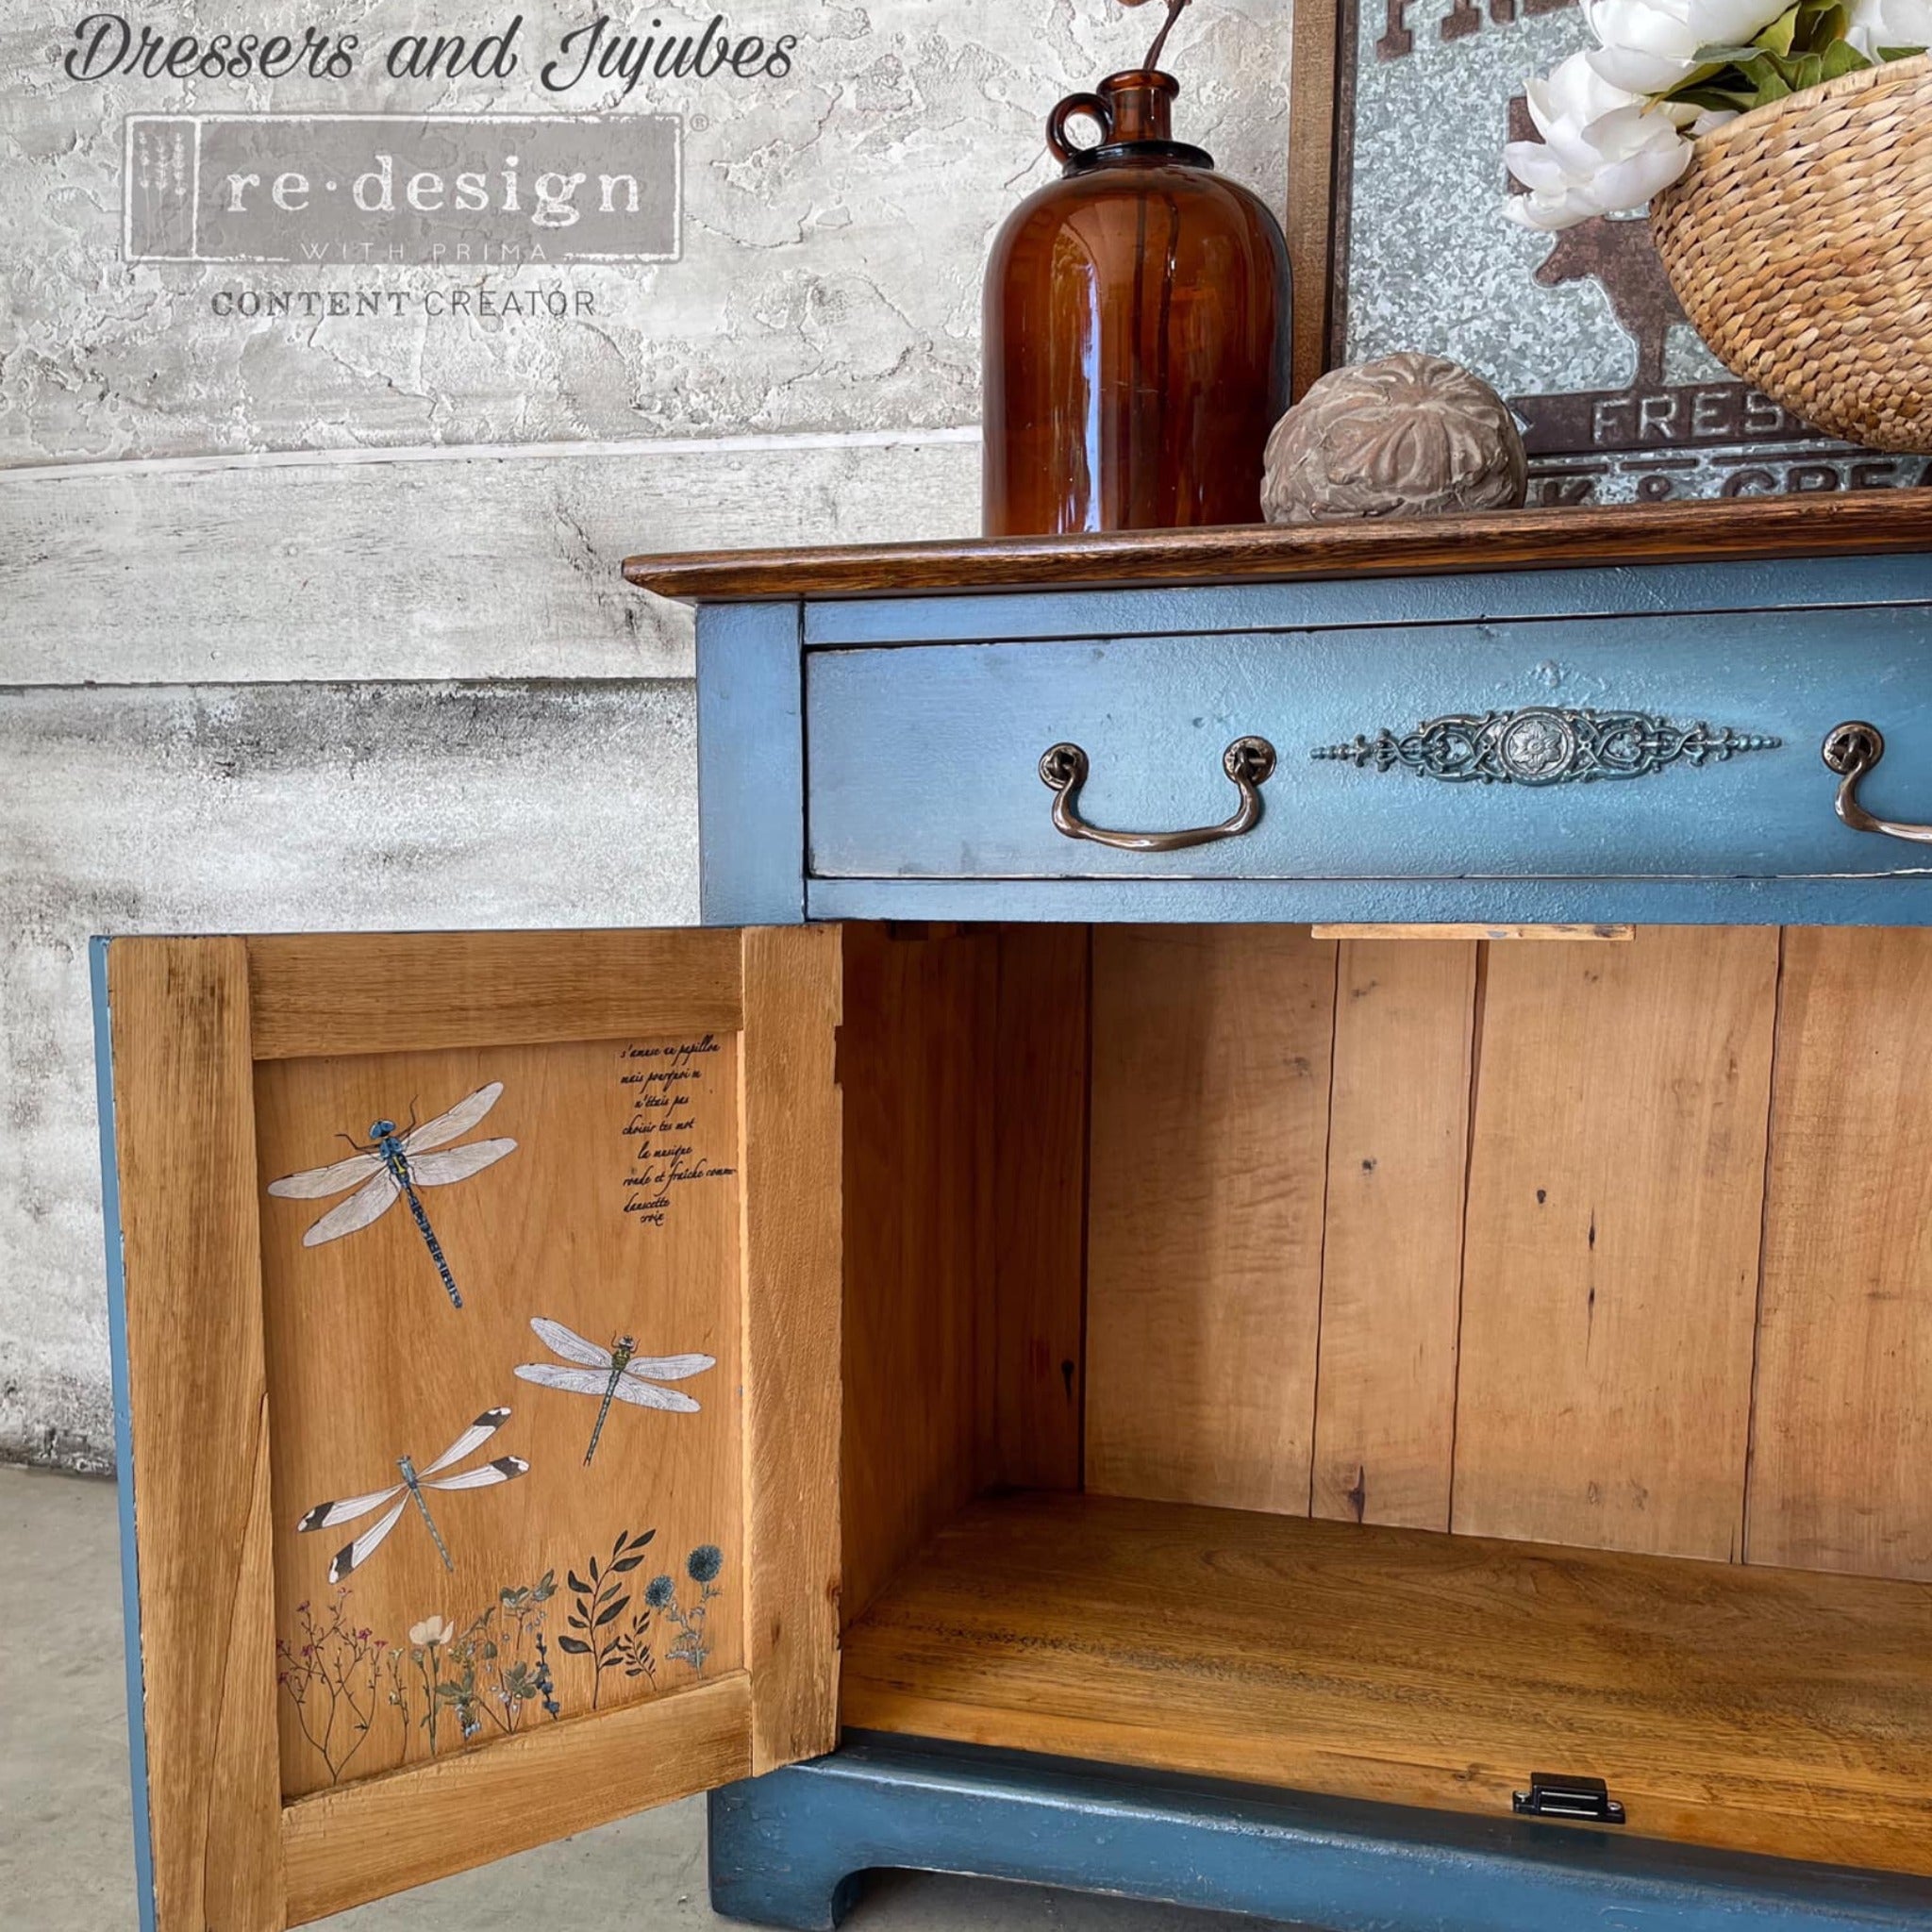 A small buffet table refurbished by Dresser and Jujubes is painted a blend of blues and features ReDesign with Prima's Spring Dragonfly small transfer on the inside of its 2 doors.